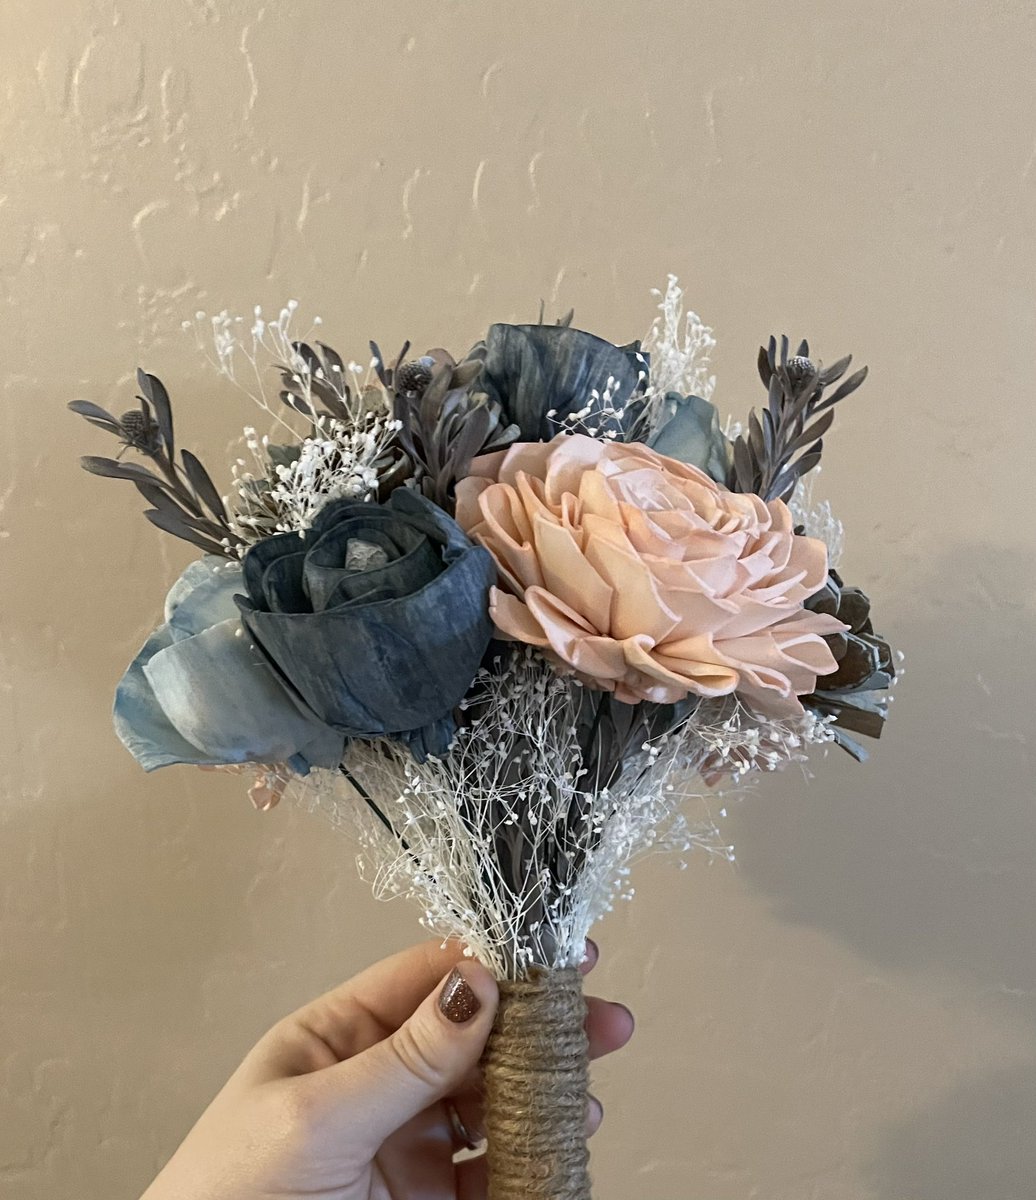 Wedding planning is really kicking off!! Loving our sample bouquet from @solawoodflowers ! So beautiful and will match our theme so well! 🚂 So excited to marry the love of my life in less than 6 months! @kultherion 

#2024Wedding #SoExcited #VerdeCanyonRailroad